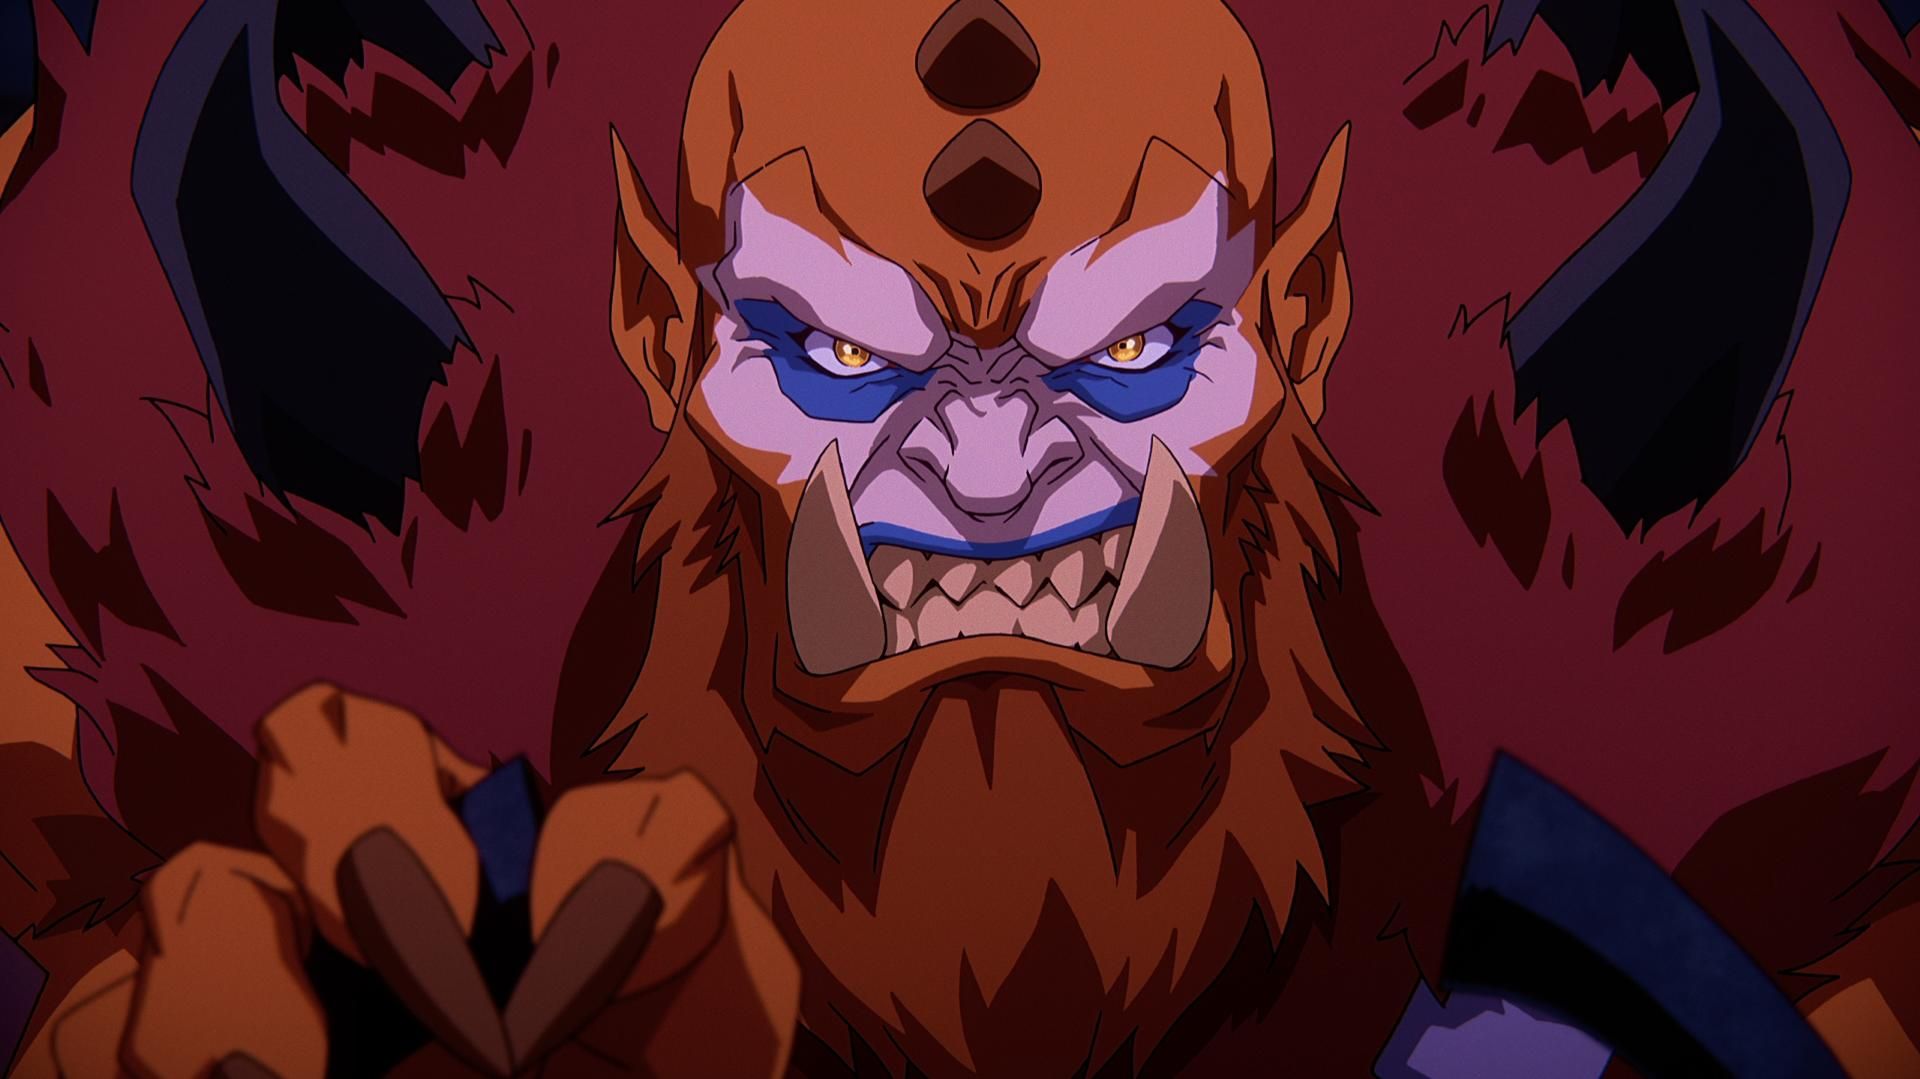 In a CG animated close-up still from Masters of the Universe: Revelation, Beast Man, a large male figure with pointed ears, maroon fur, a long red beard, pink and blue face paint and horns on his head and back. He looks straight ahead and bares his teeth in a growl.